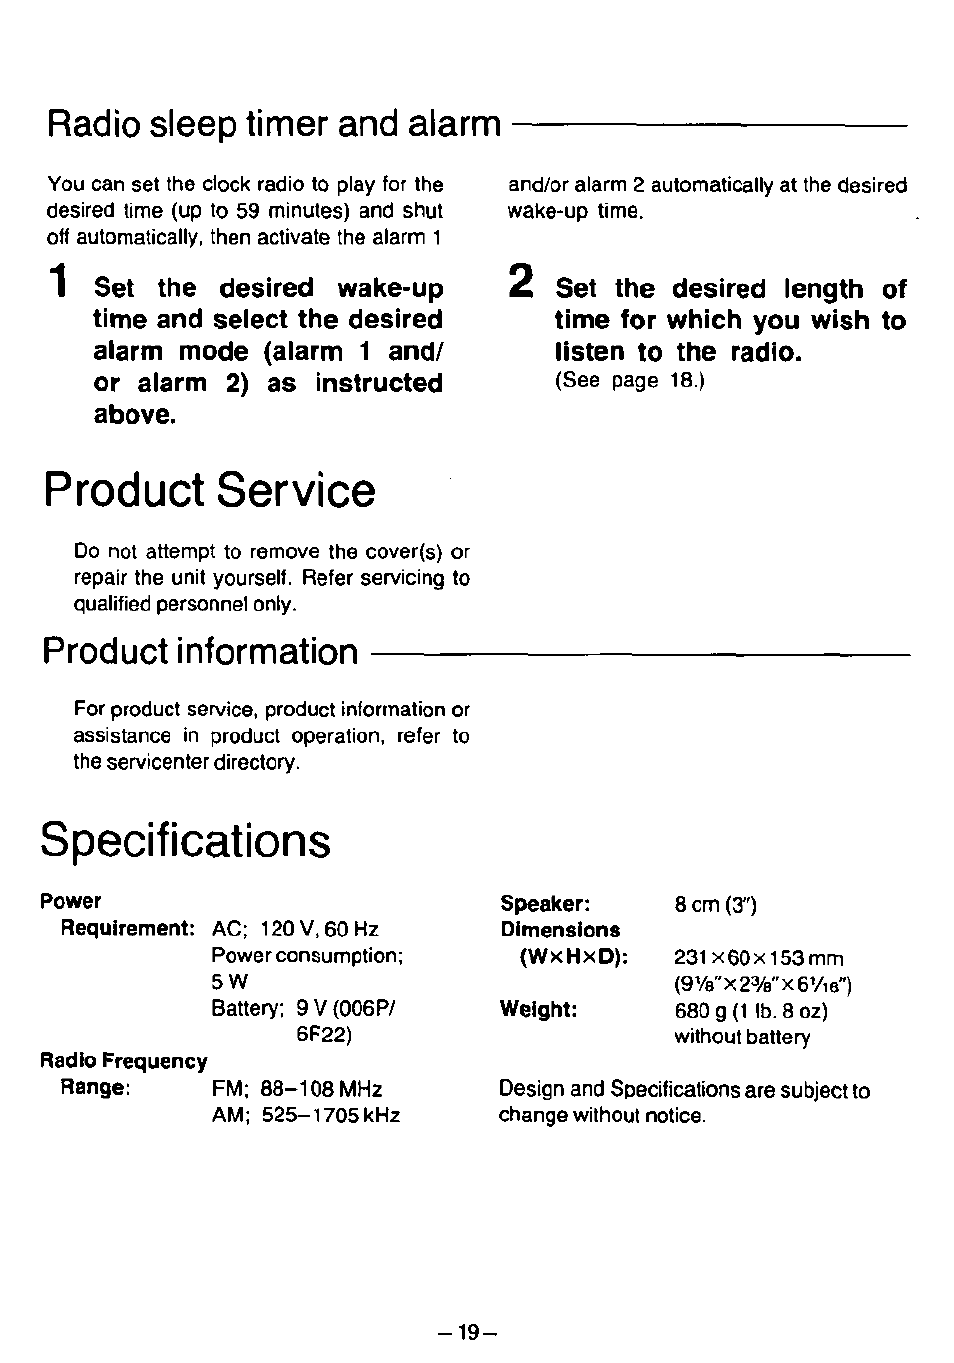 Product service, Specifications, Radio sleep tinner and alarm | Product information | Panasonic RC6099 User Manual | Page 19 / 20